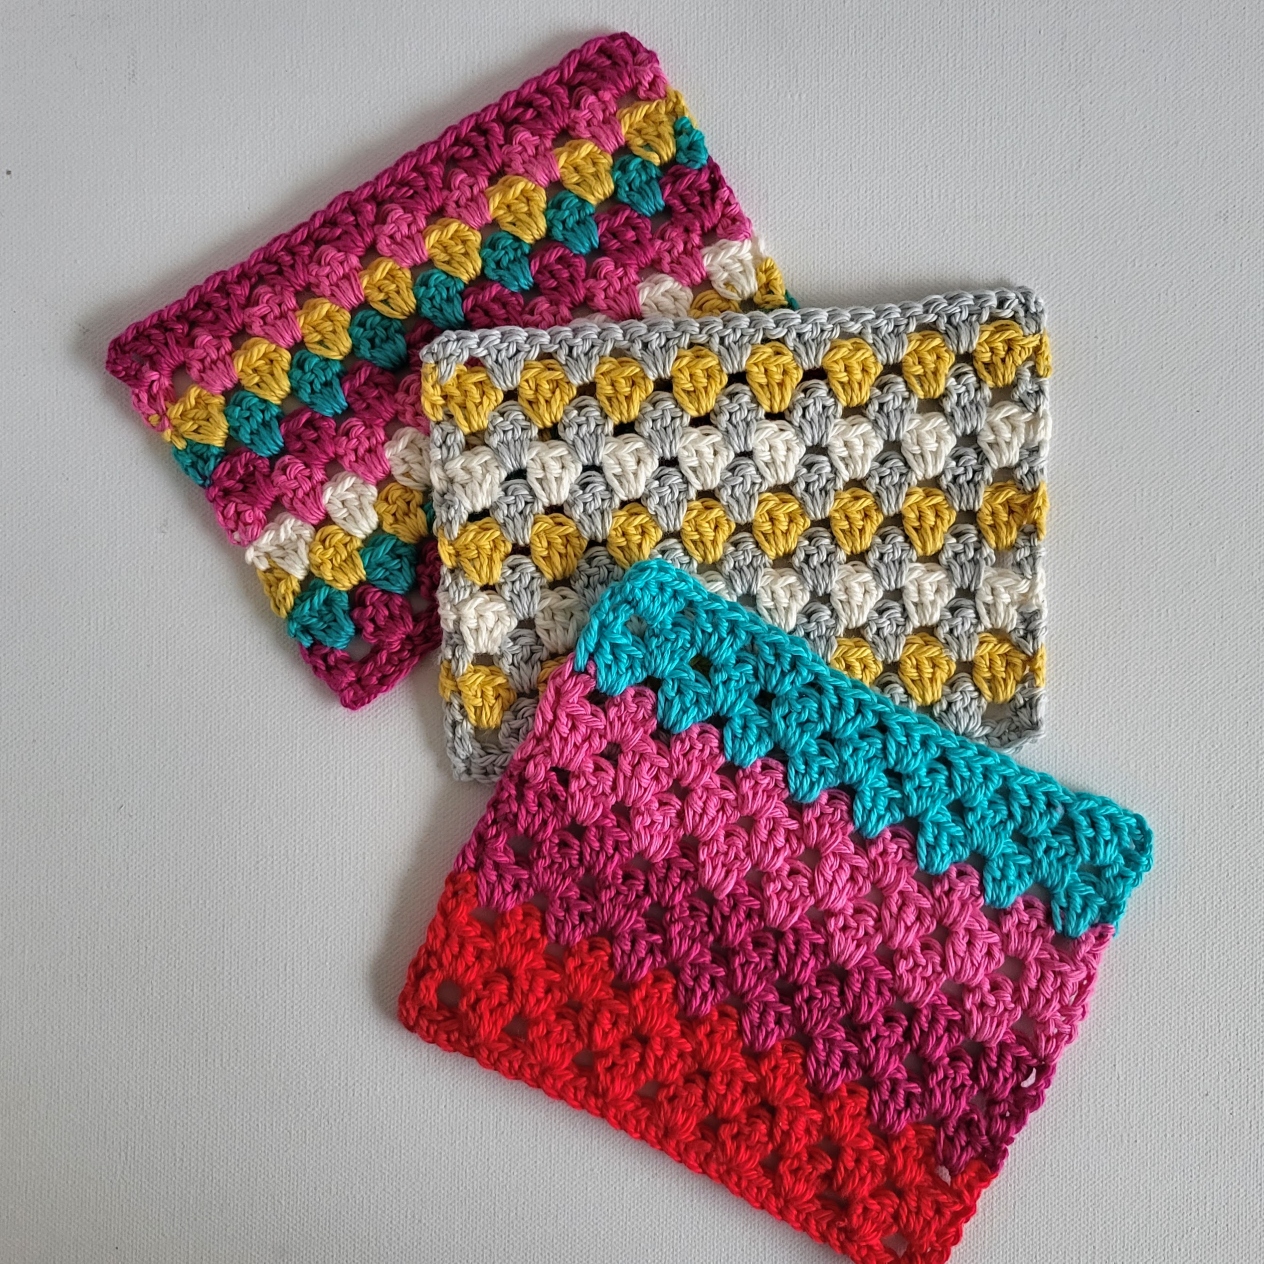 3 crochet pieces in multiple colors using the granny stitch